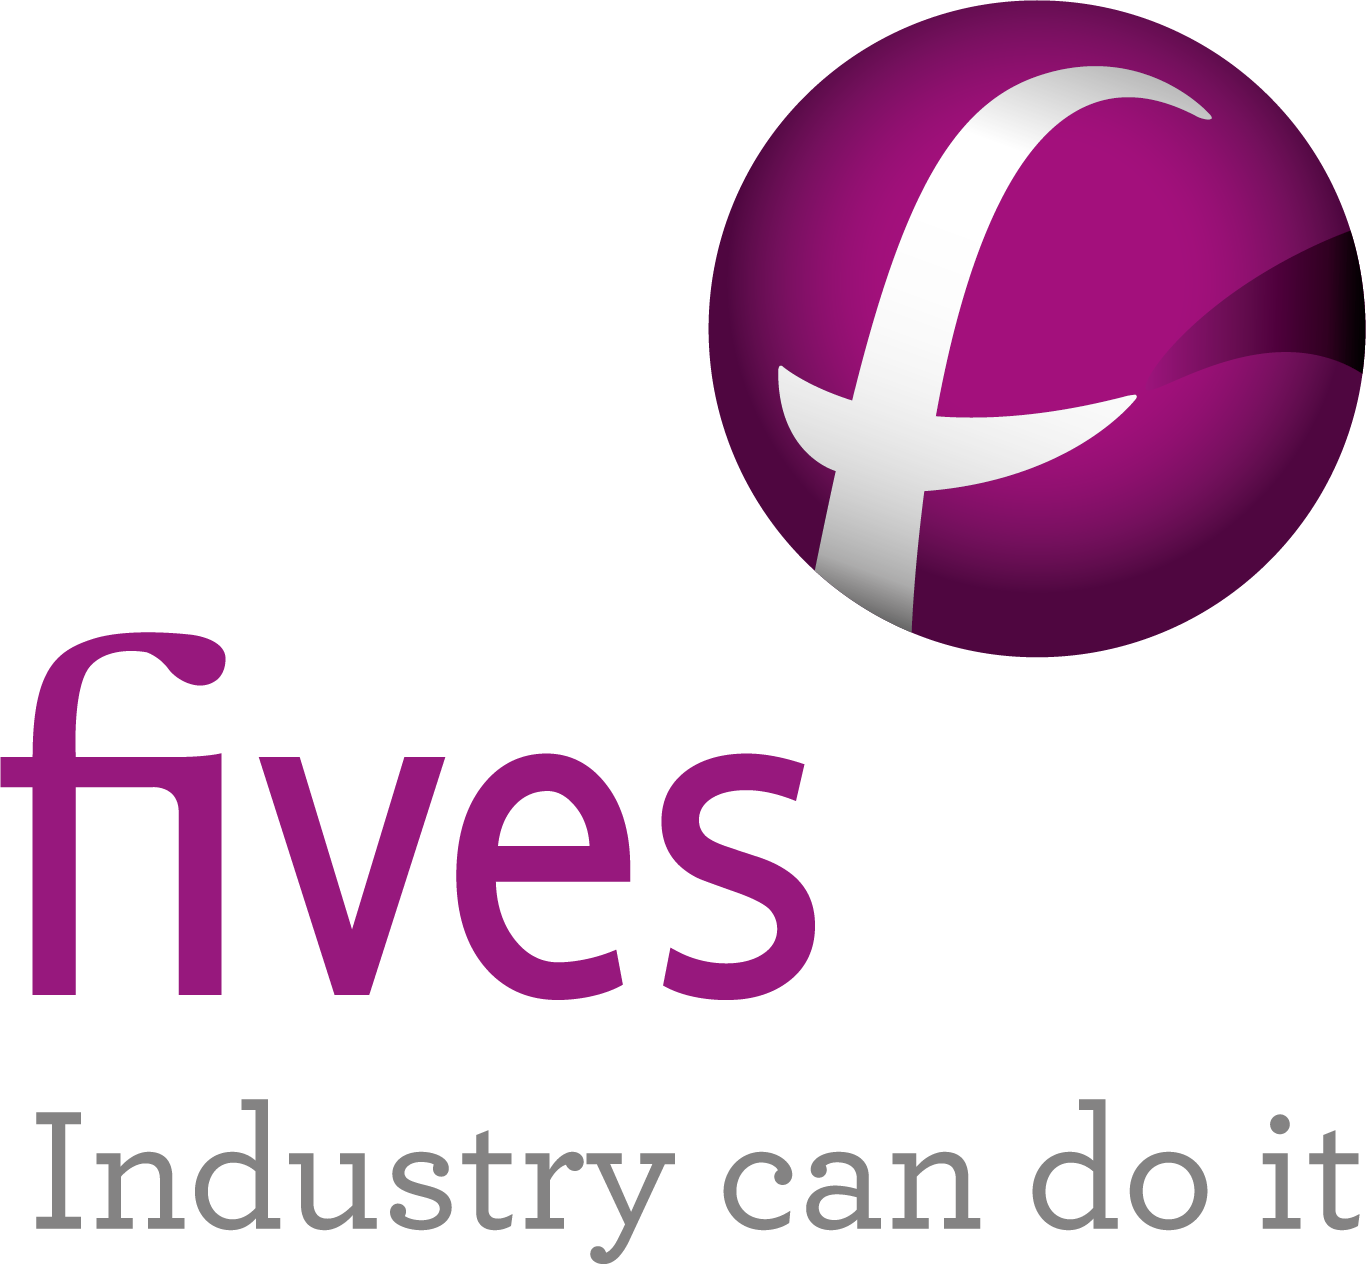 Fives_logotype_signature_outlined